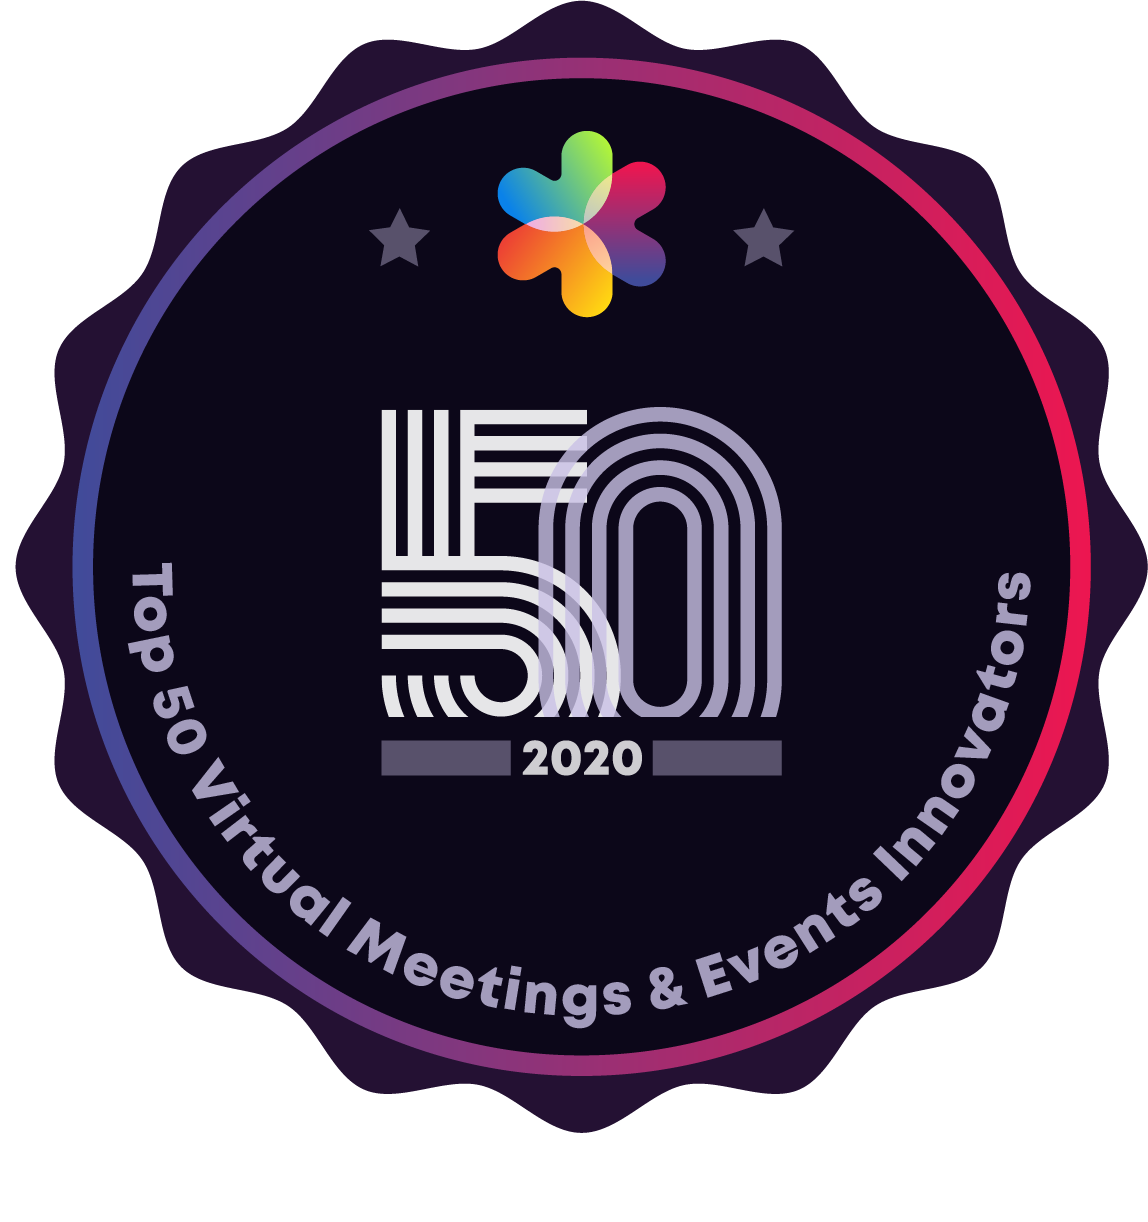 Eventex Connect has announced its Top 50 Virtual Meetings & Events Innovators list.